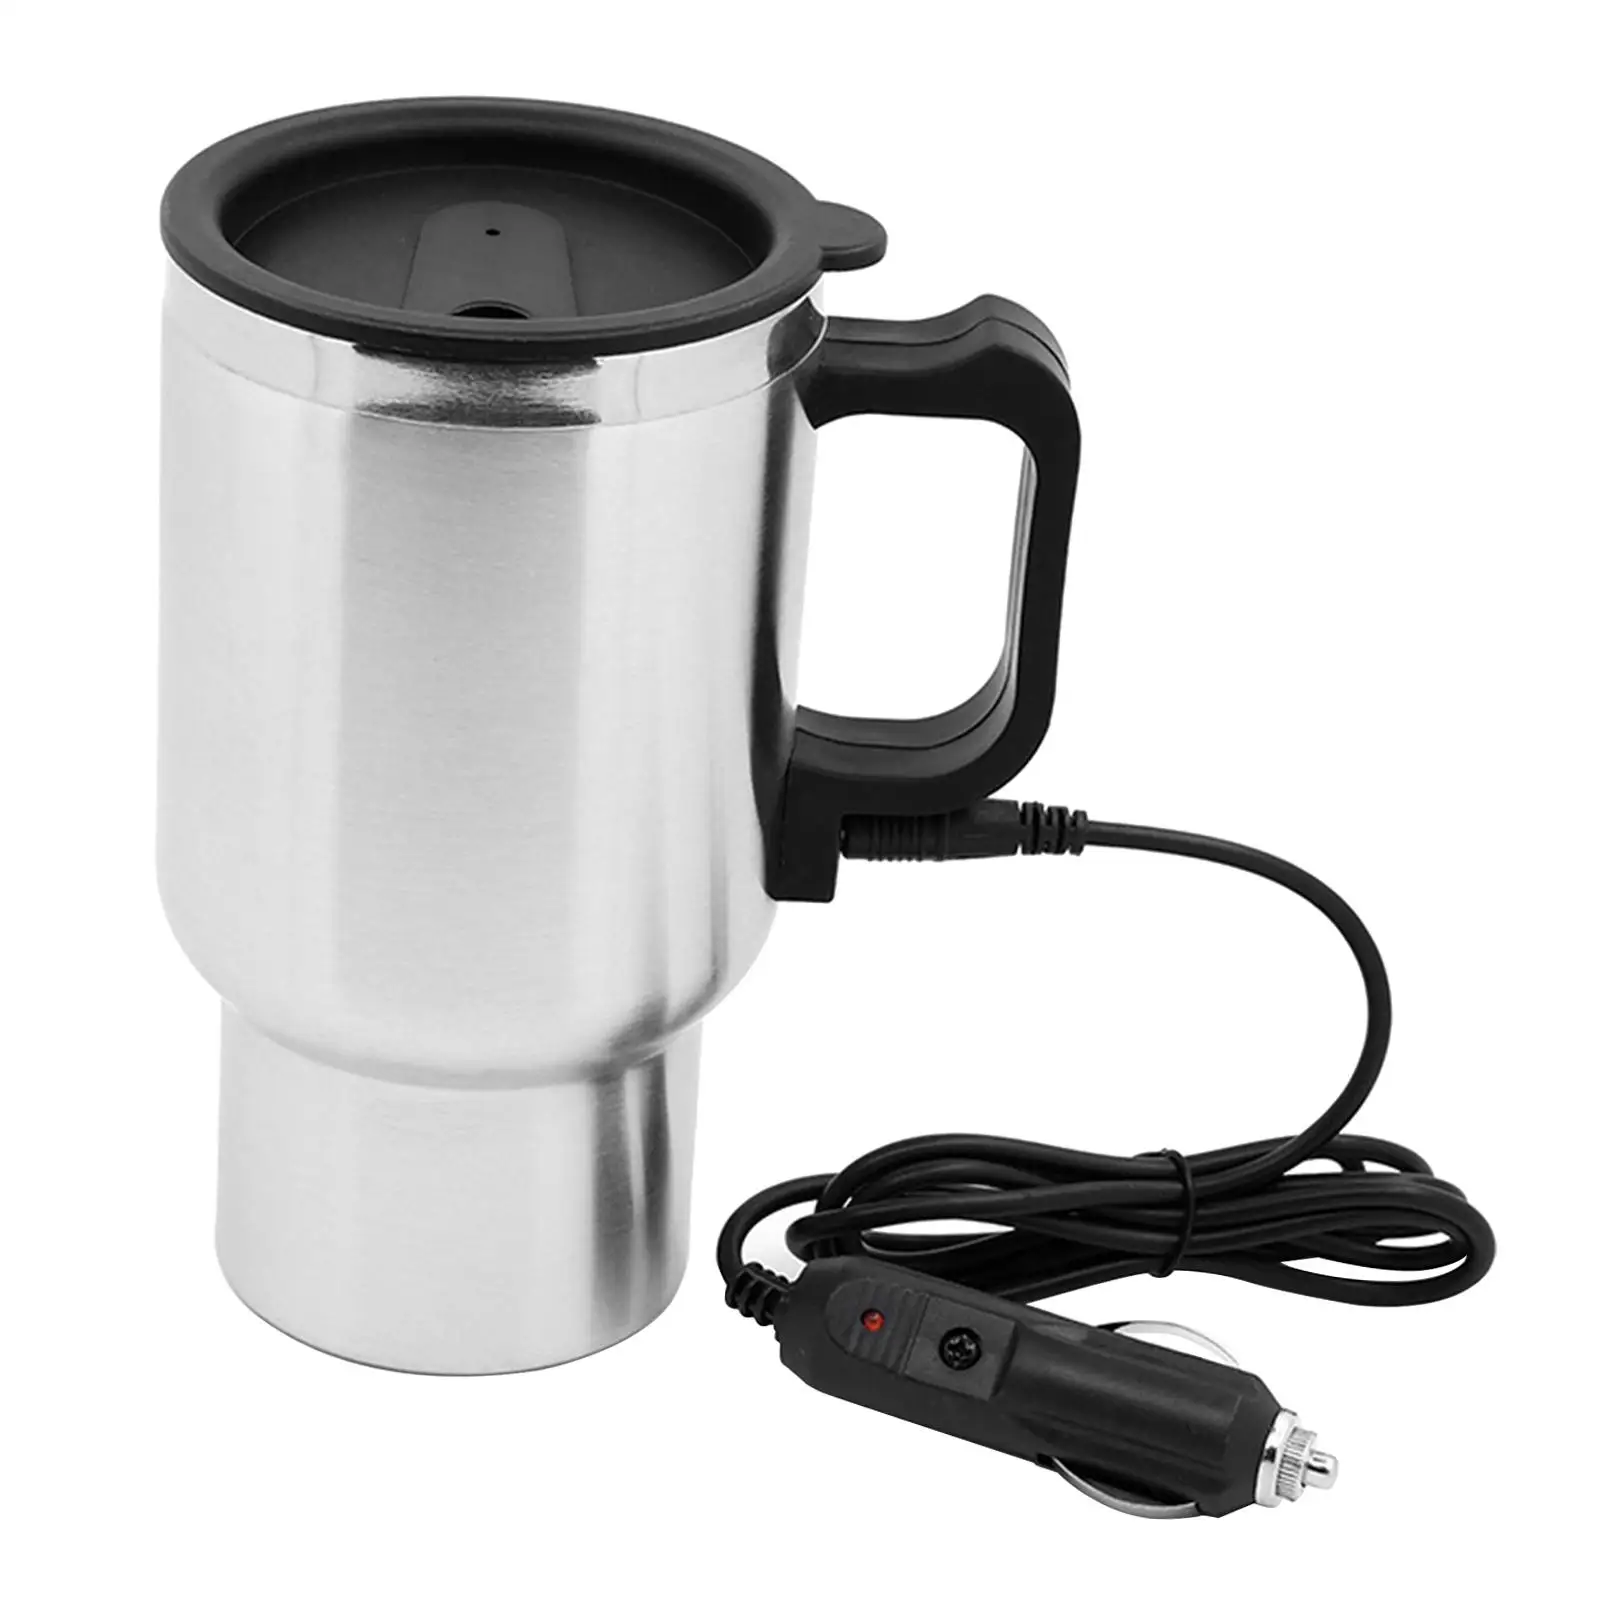 12V Car Heating Cup Stainless Steel Coffee Cup Insulated Heated Mug,500ml Car Kettle for Heating Water, Coffee, Milk, Tea